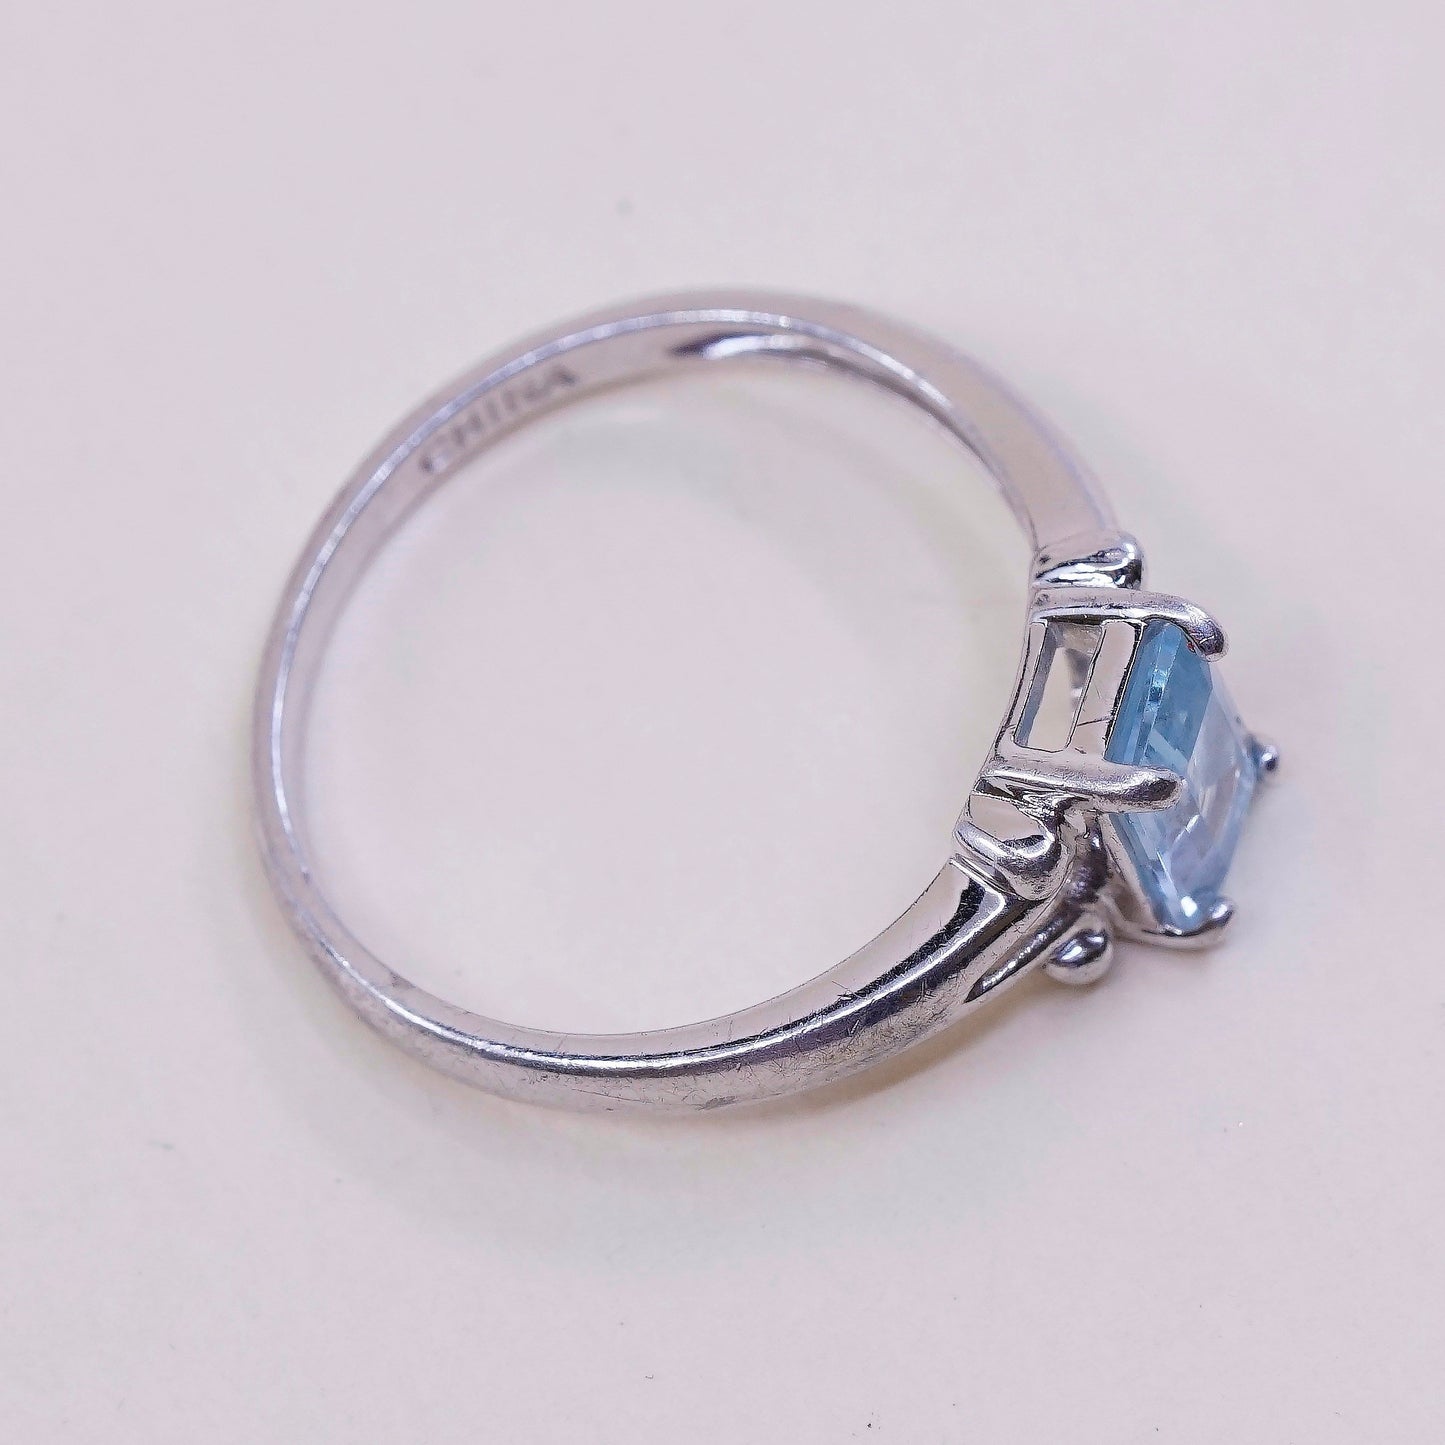 sz 7.25, vtg Sterling silver statement ring, 925 stackable band w/ blue topaz